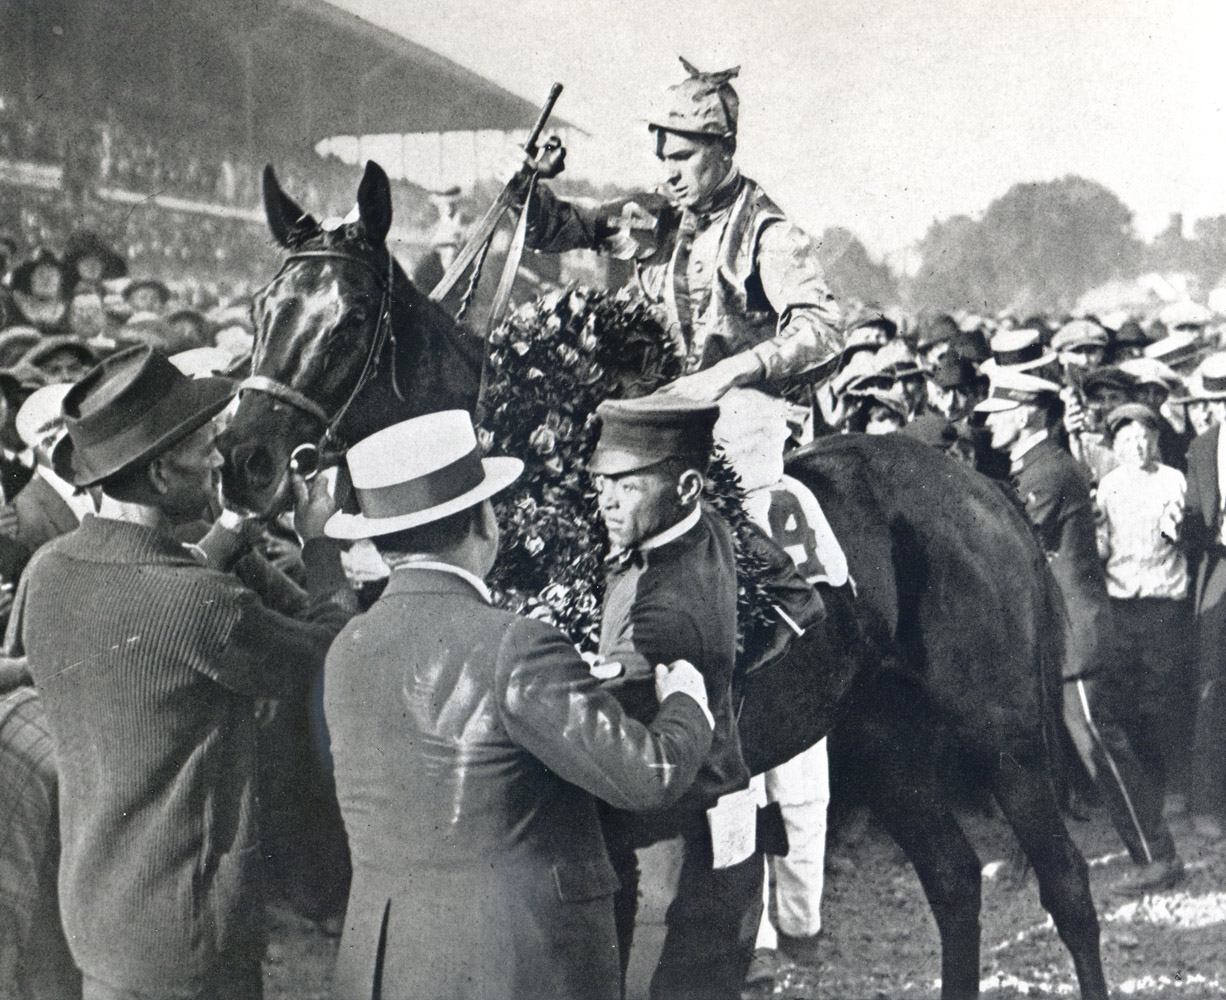 Albert Johnson and Morvich in the winner's circle for the 1922 Kentucky Derby (Churchill Downs Inc./Kinetic Corp. /Museum Collection)